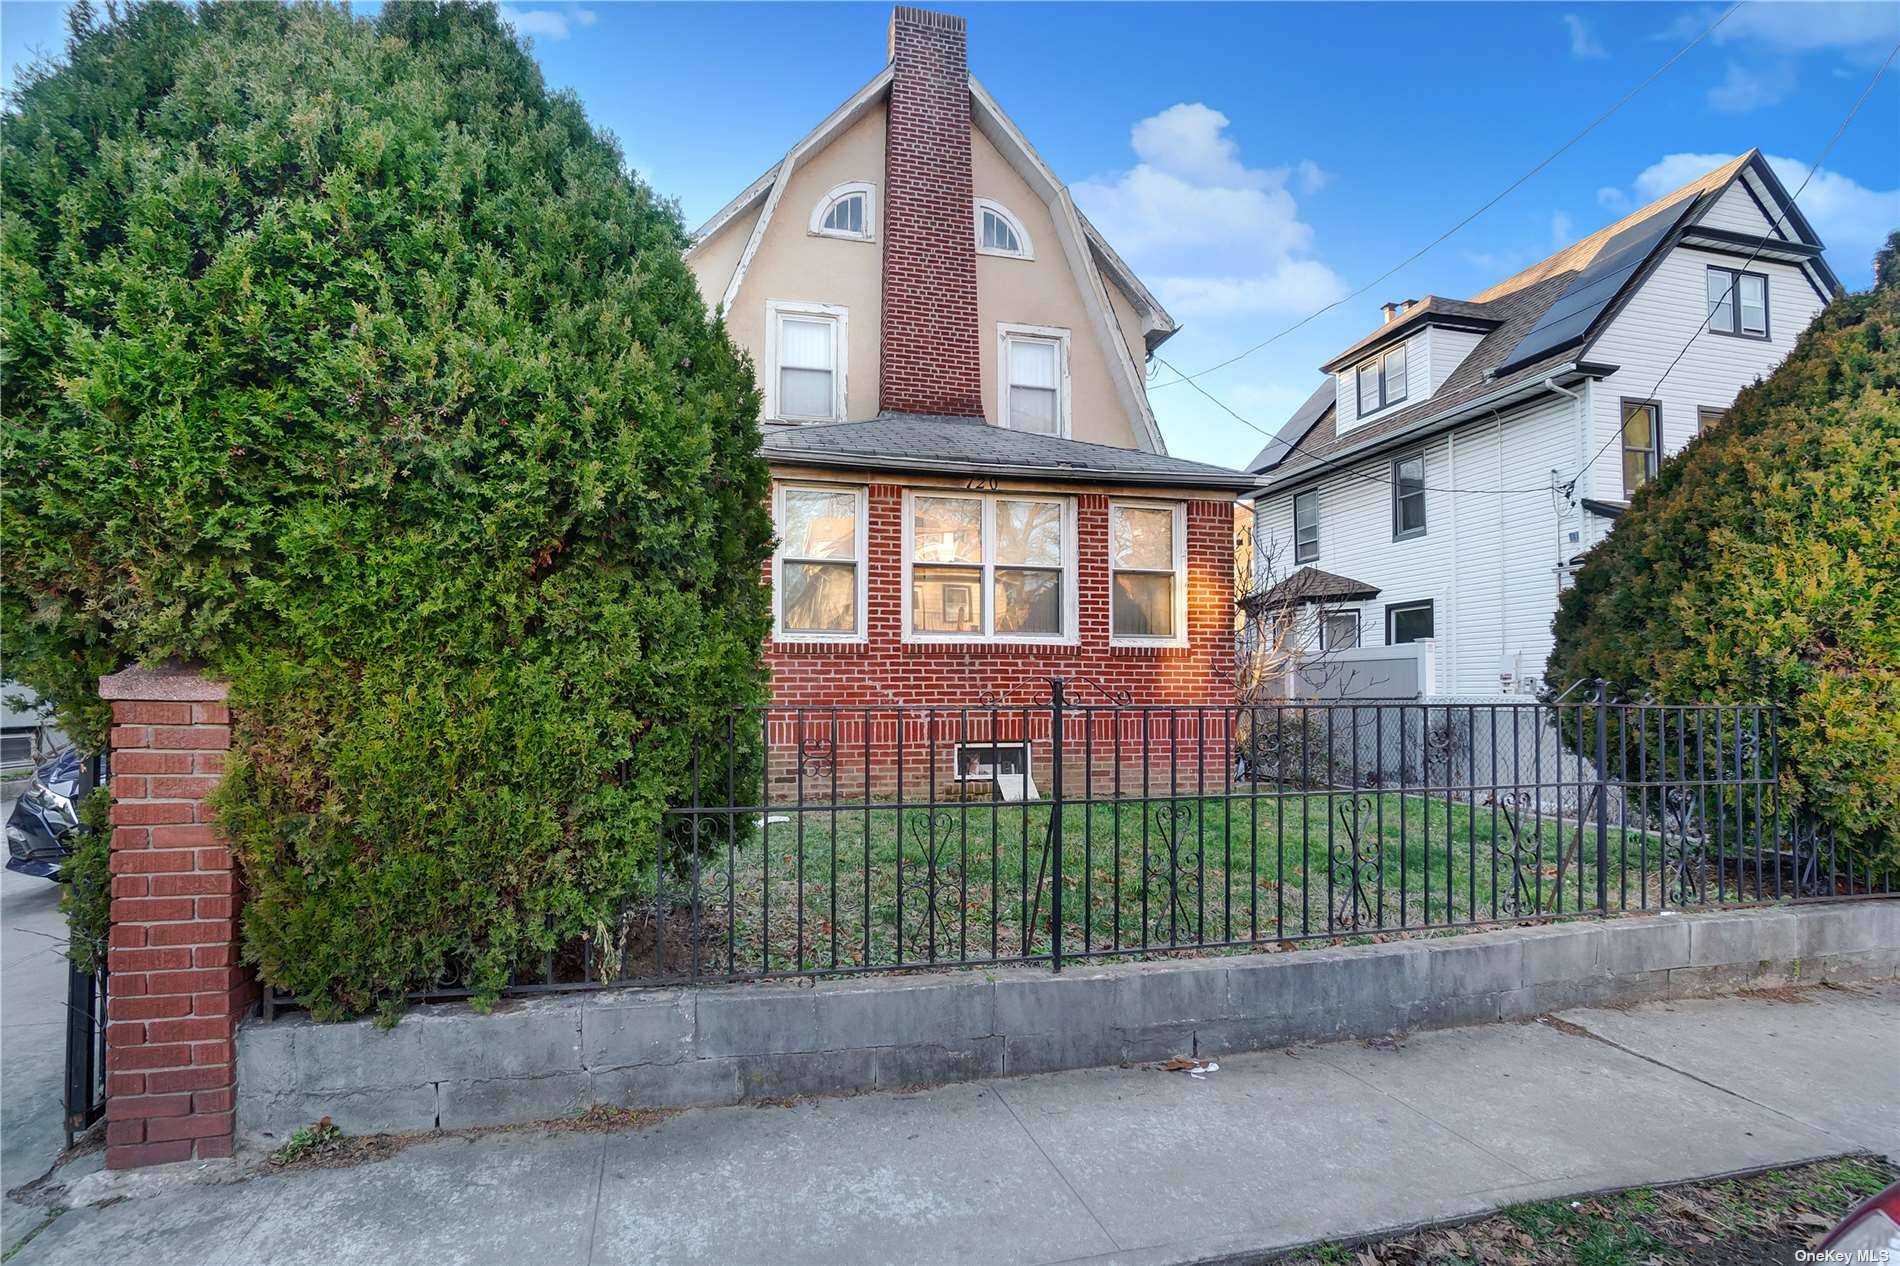 Rare development opportunity just blocks from Brooklyn College and not far from the well known intersection of Flatbush and Nostrand Avenues, where there's Starbucks and Target and the 2 train ...